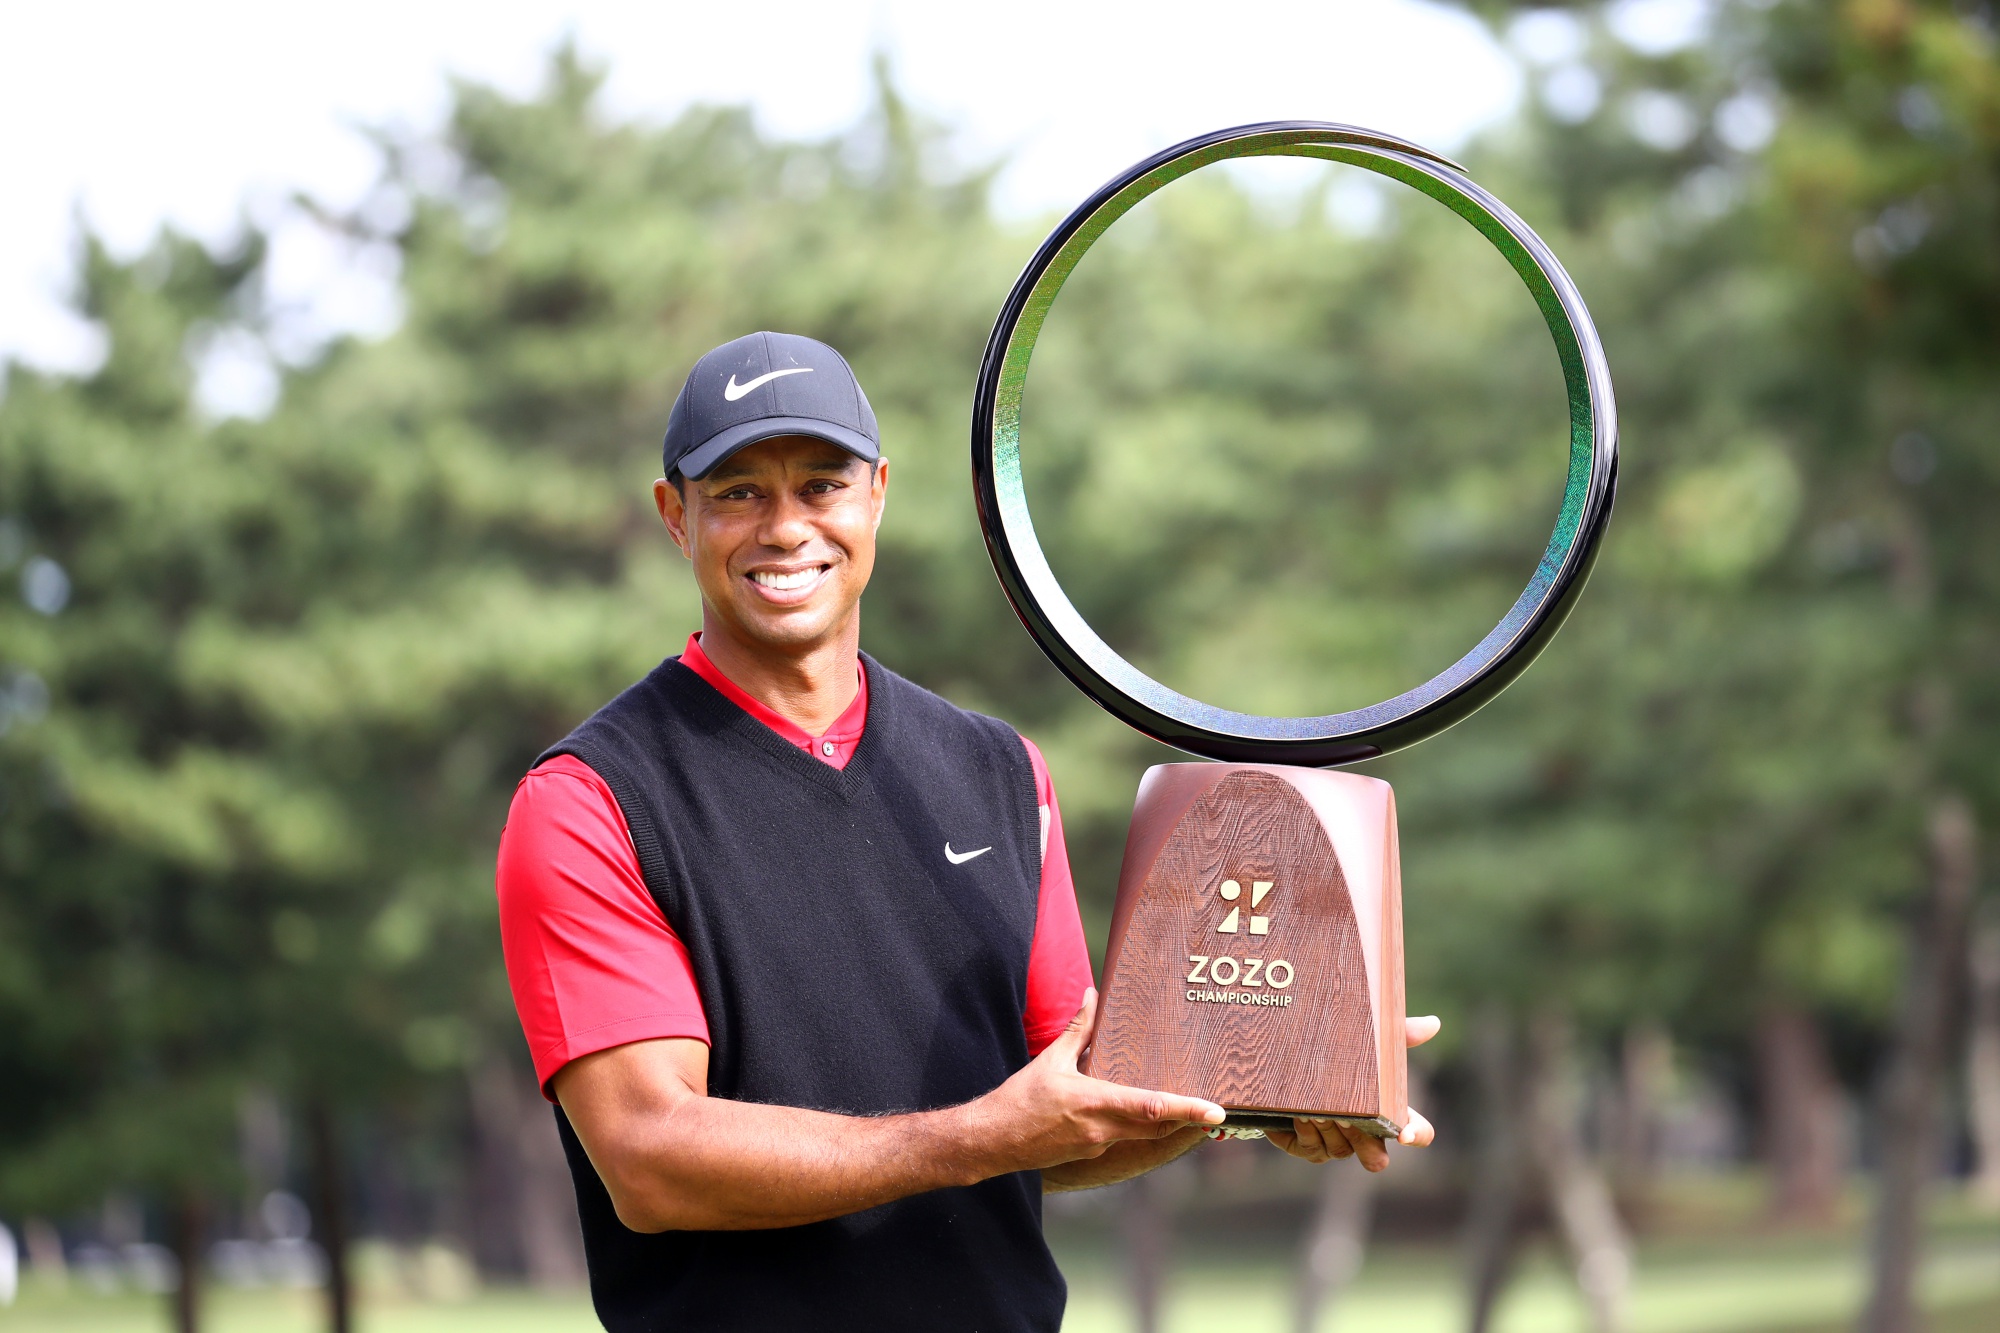 Tiger Woods Ties Sam Snead's Record of 82 PGA Tour Wins Bloomberg